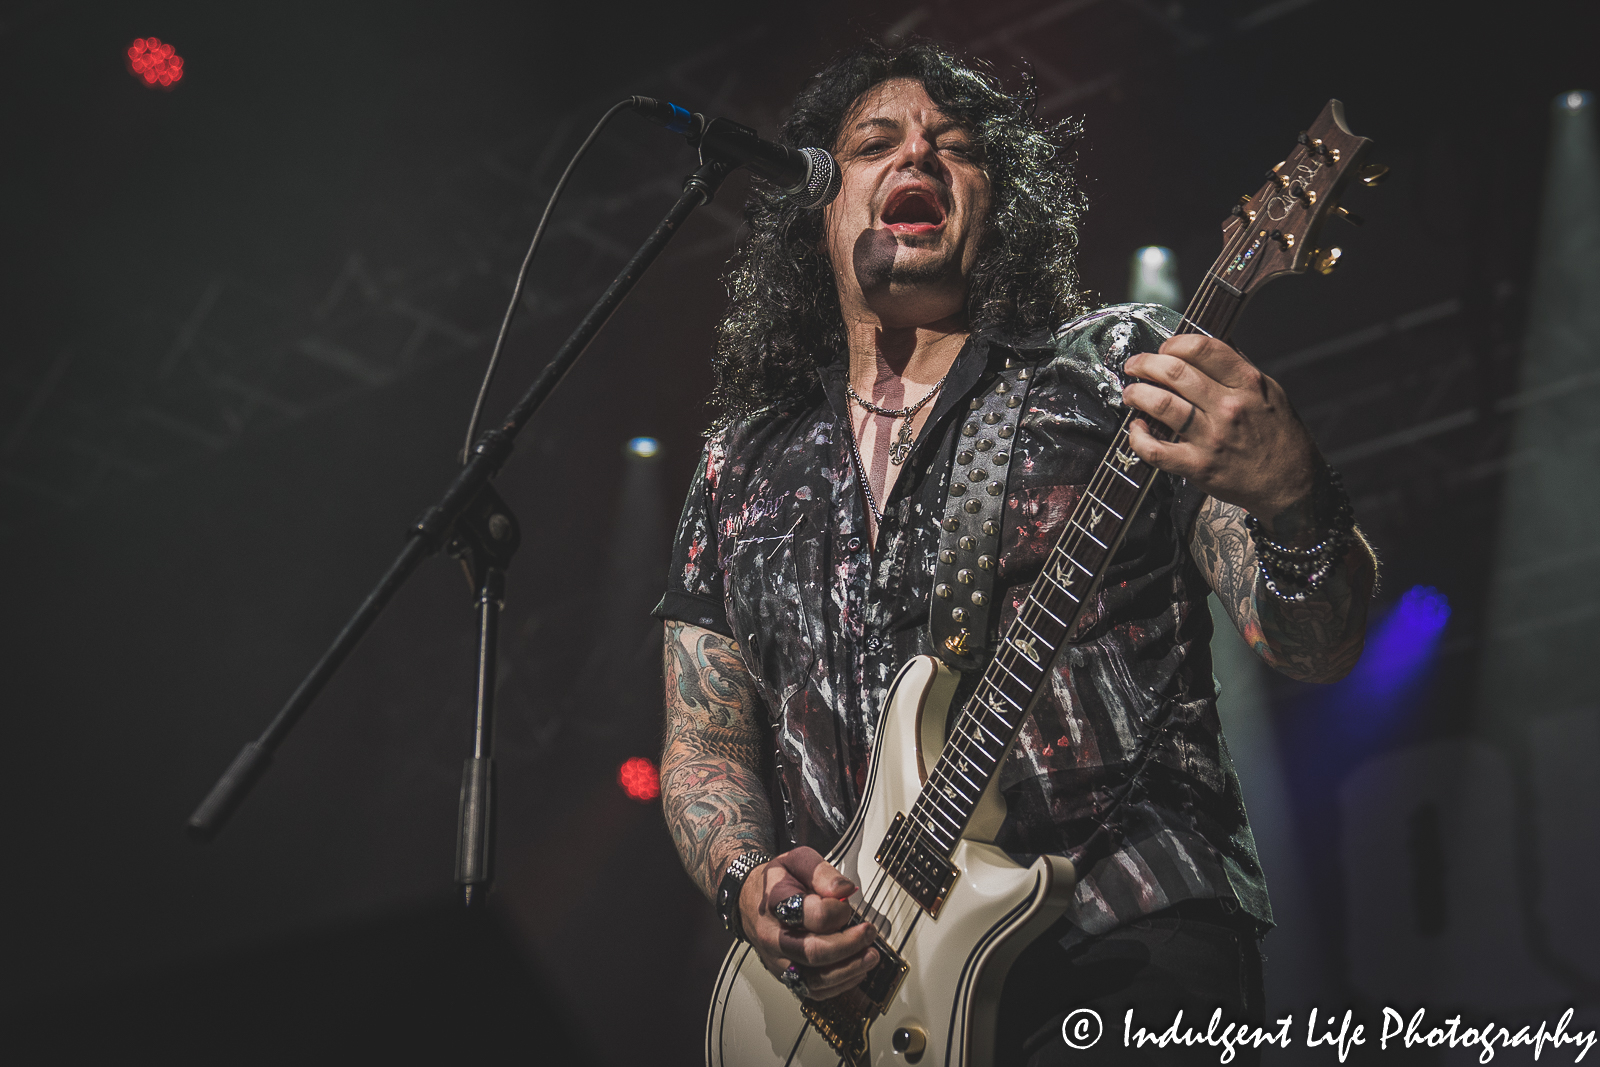 Quiet Riot guitarist Alex Grossi performing live in concert at Ameristar Casino's Star Pavilion in Kansas City, MO on July 29, 2022.